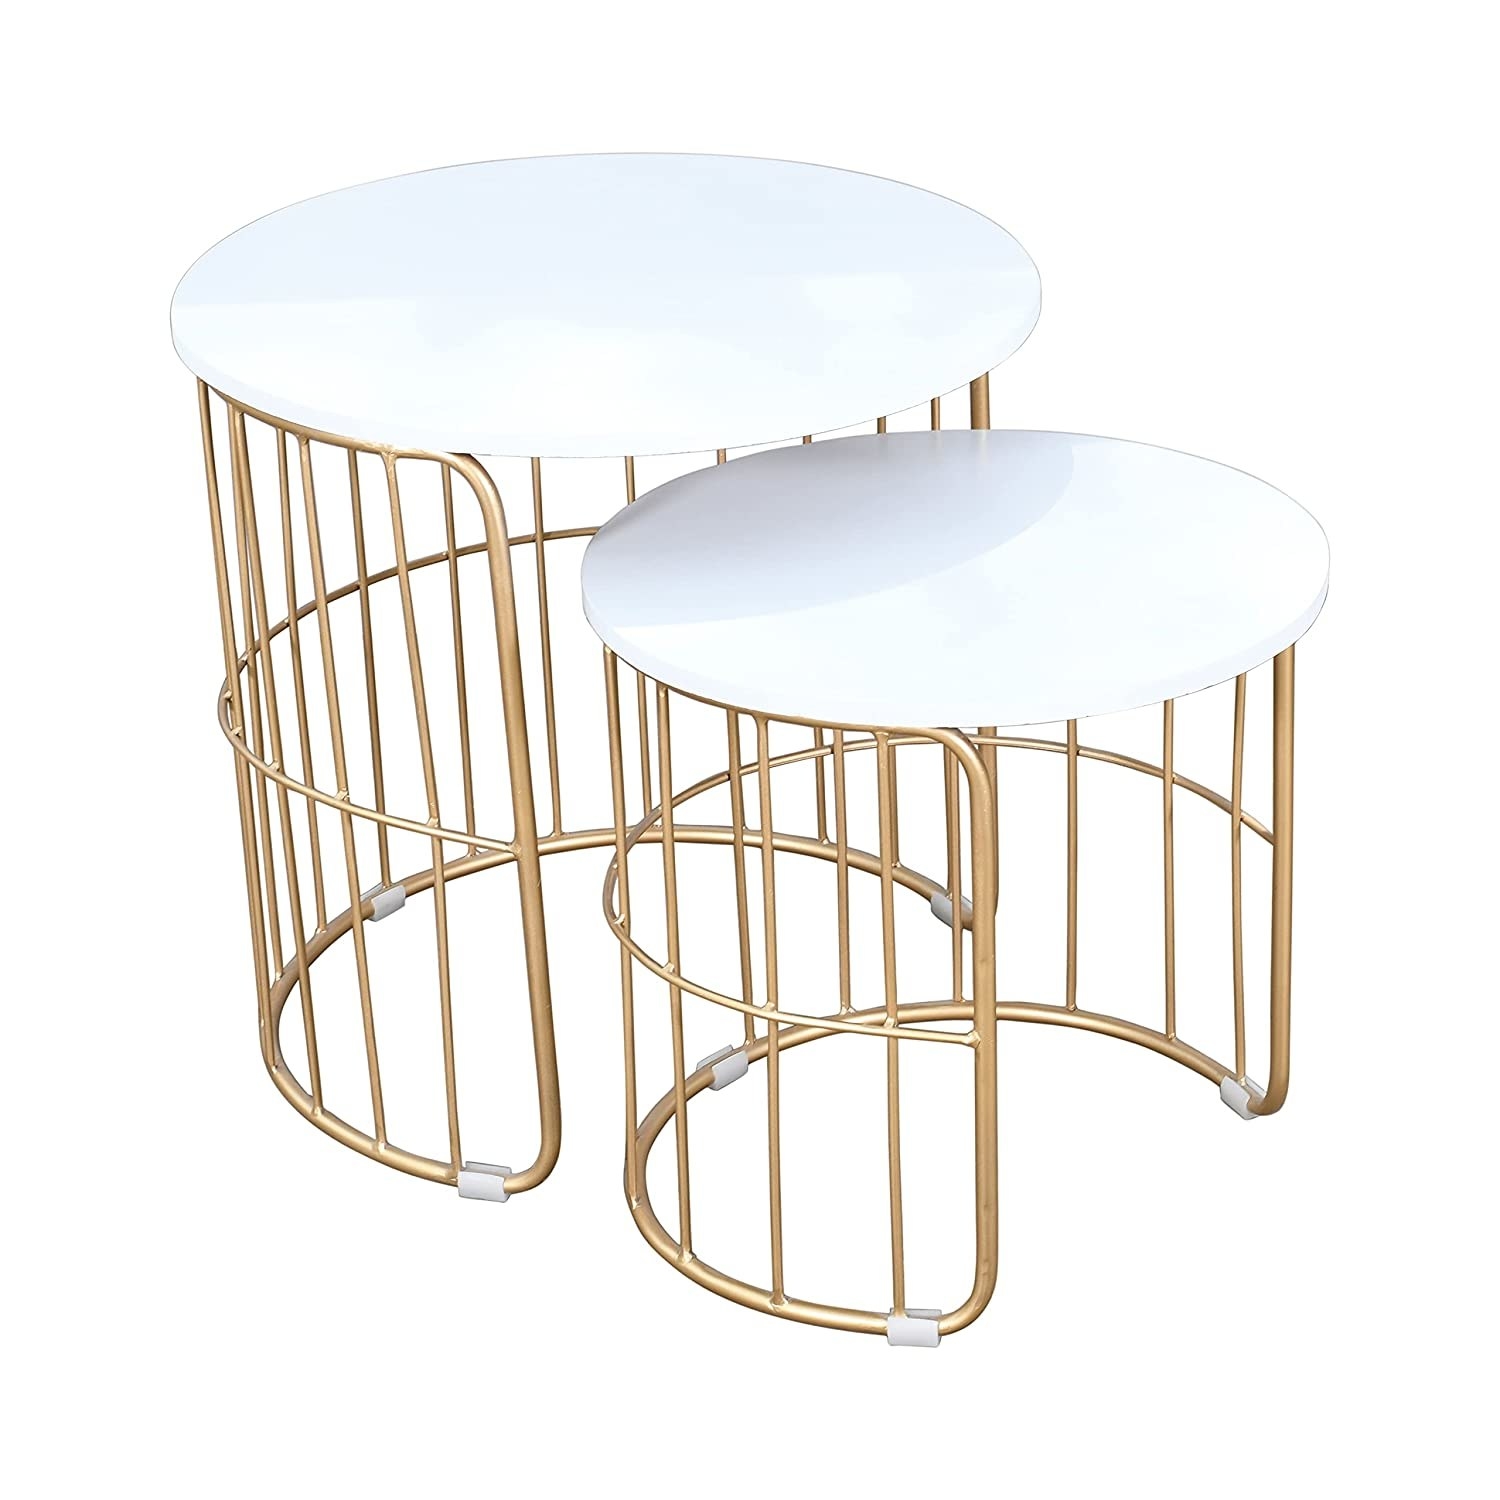 Gold grid-shaped semicircular base with white table tops